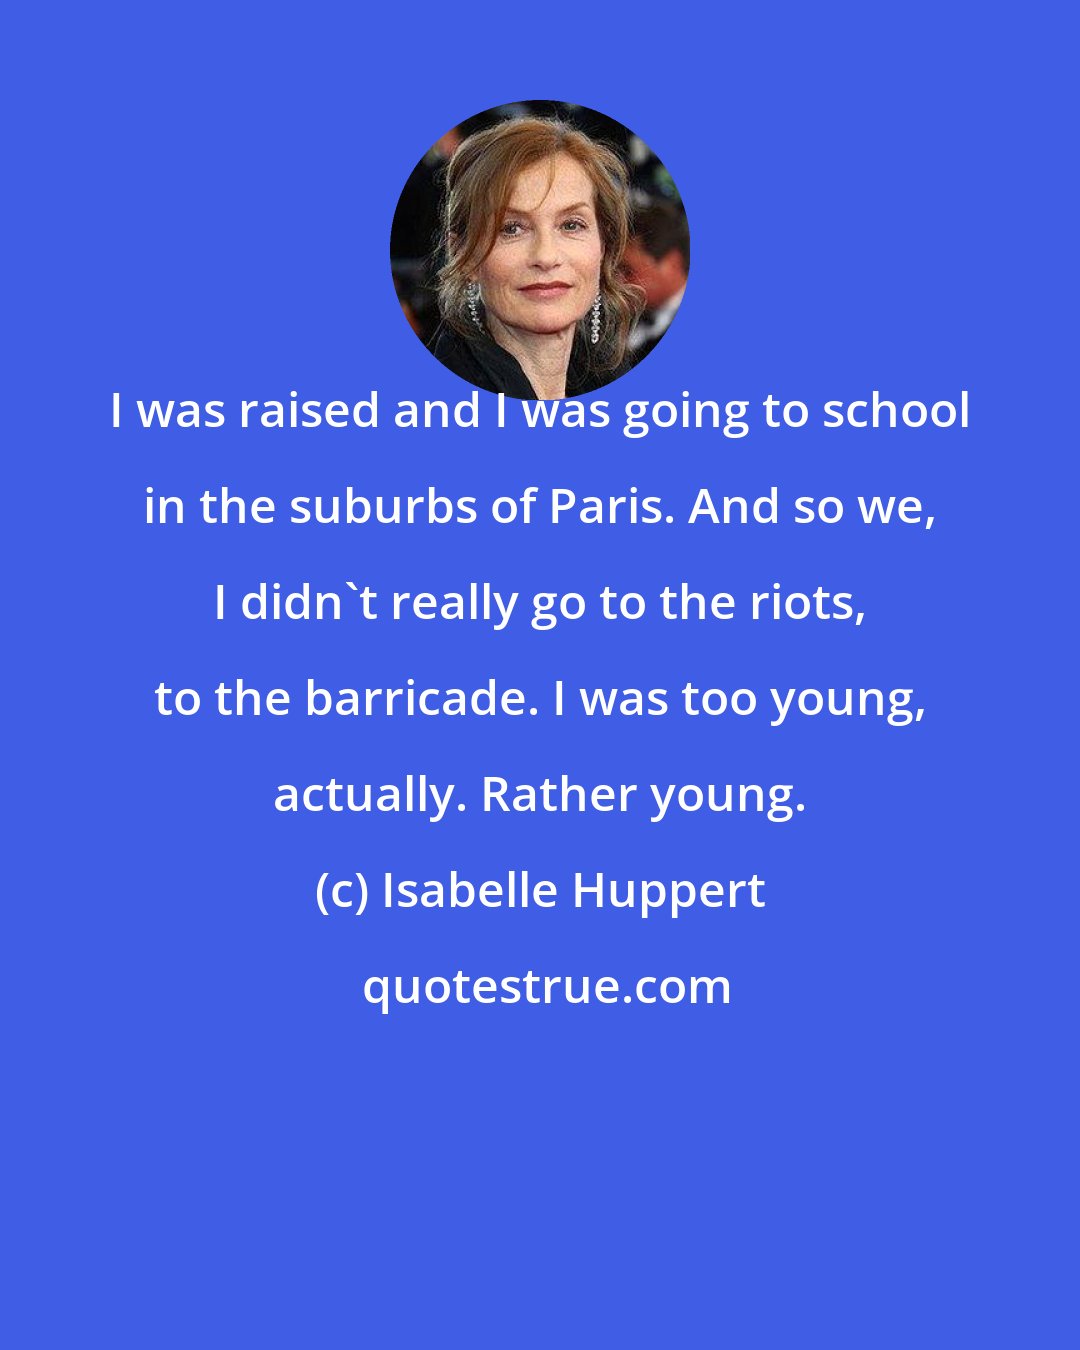 Isabelle Huppert: I was raised and I was going to school in the suburbs of Paris. And so we, I didn't really go to the riots, to the barricade. I was too young, actually. Rather young.